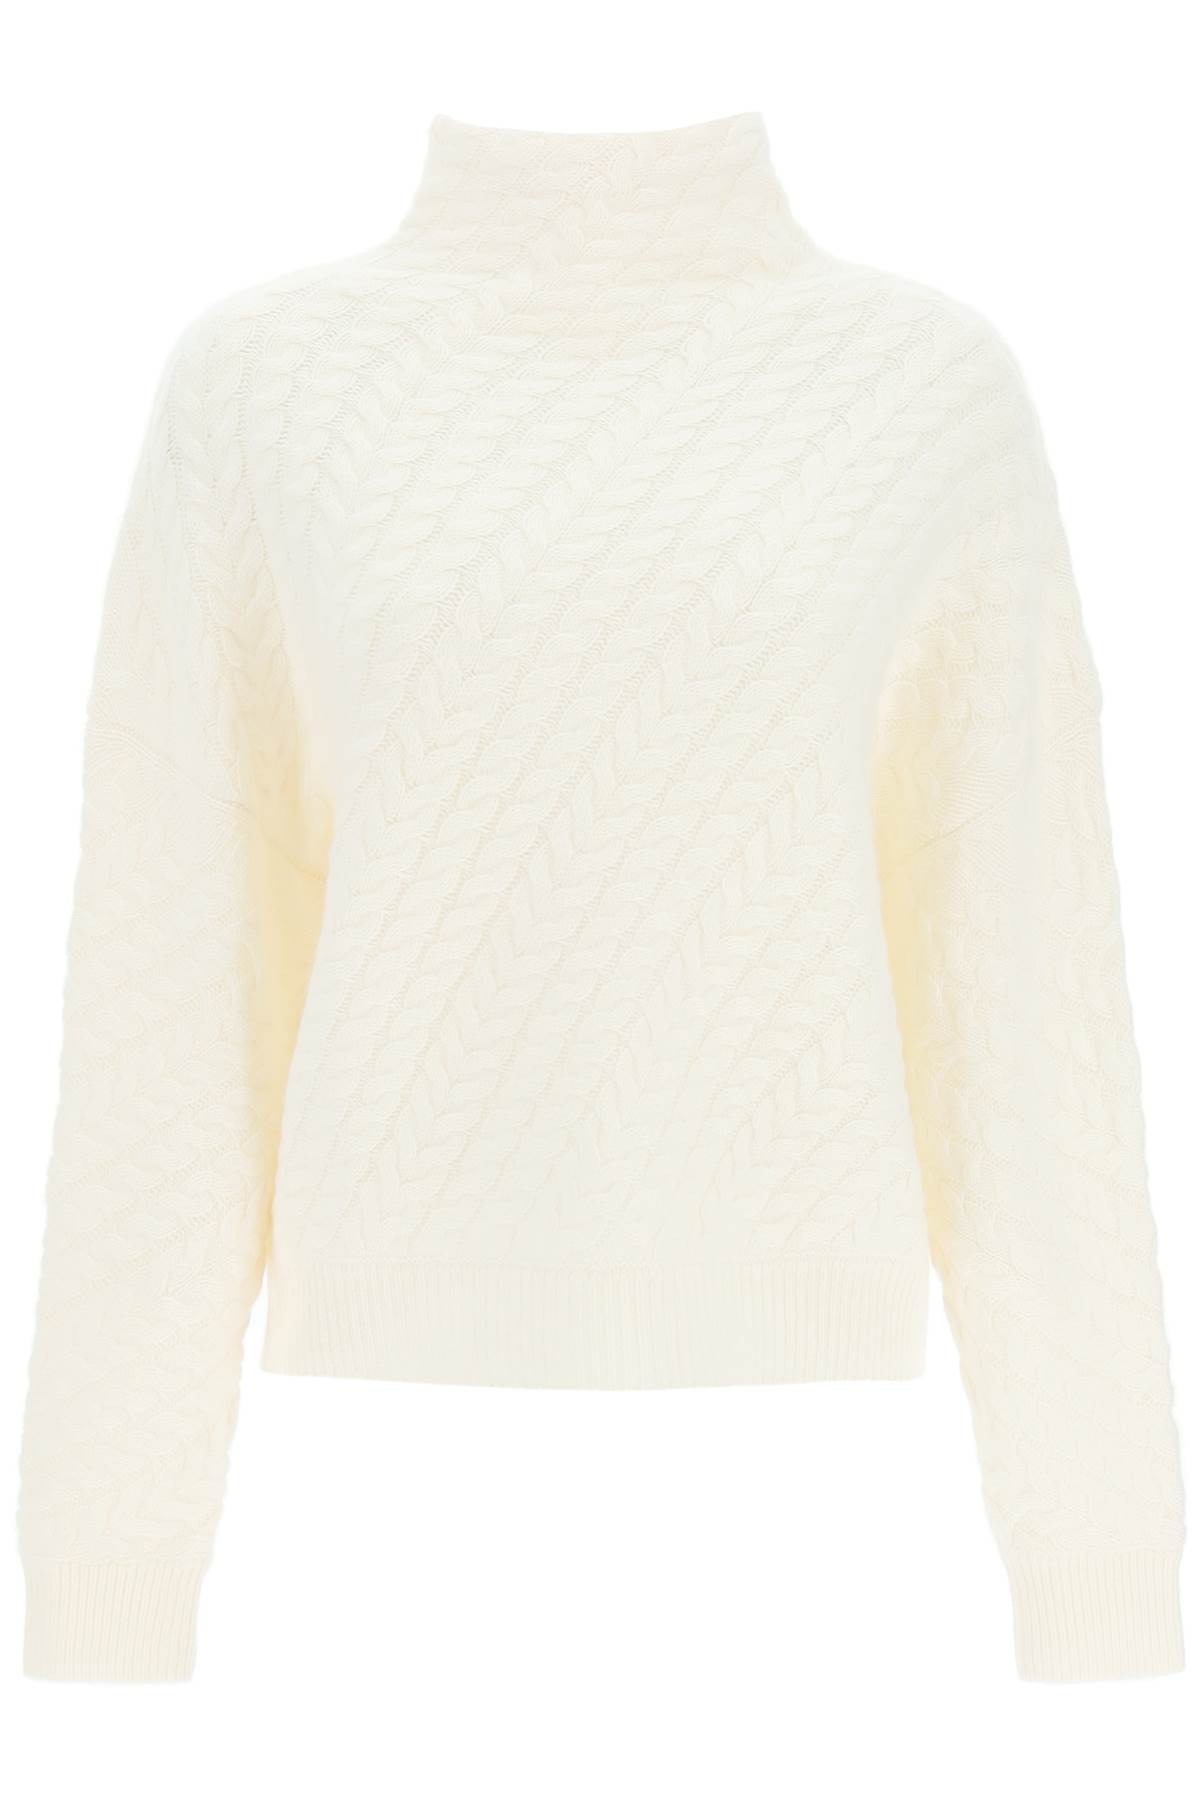 Loulou Studio Cable-knit Cashmere Sweater With Dolman Sleeves